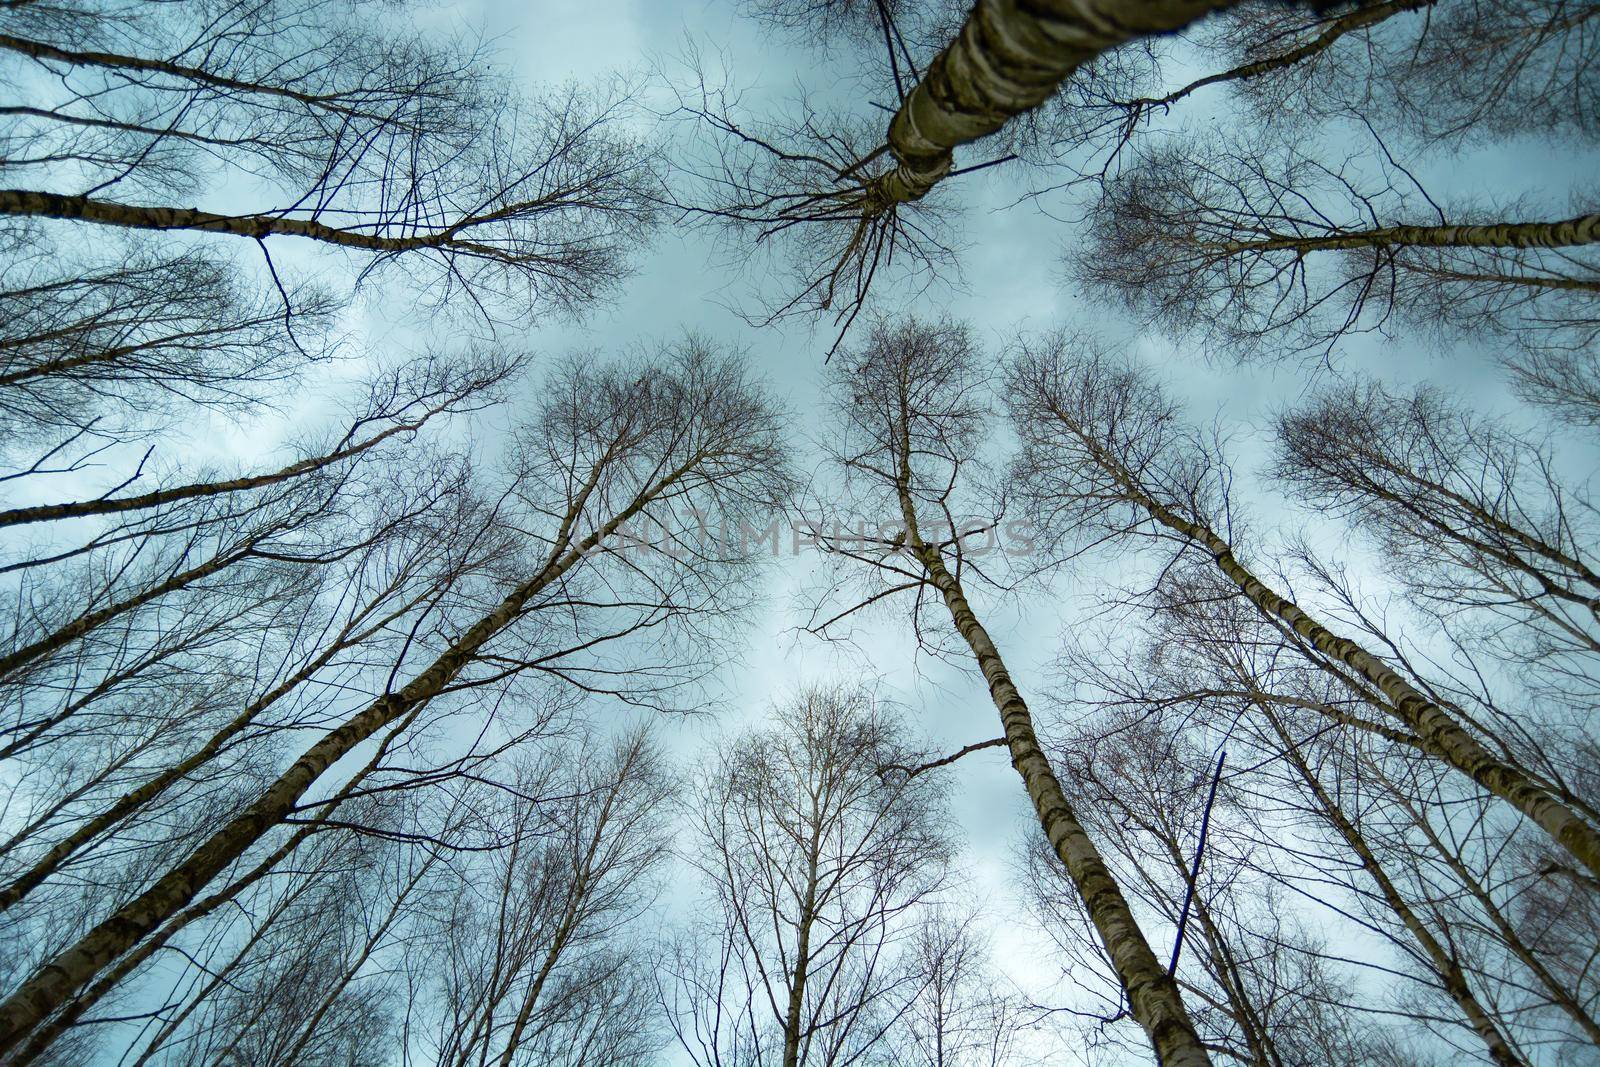 View of the treetops without leaves and the cloudy sky, tall trees in february